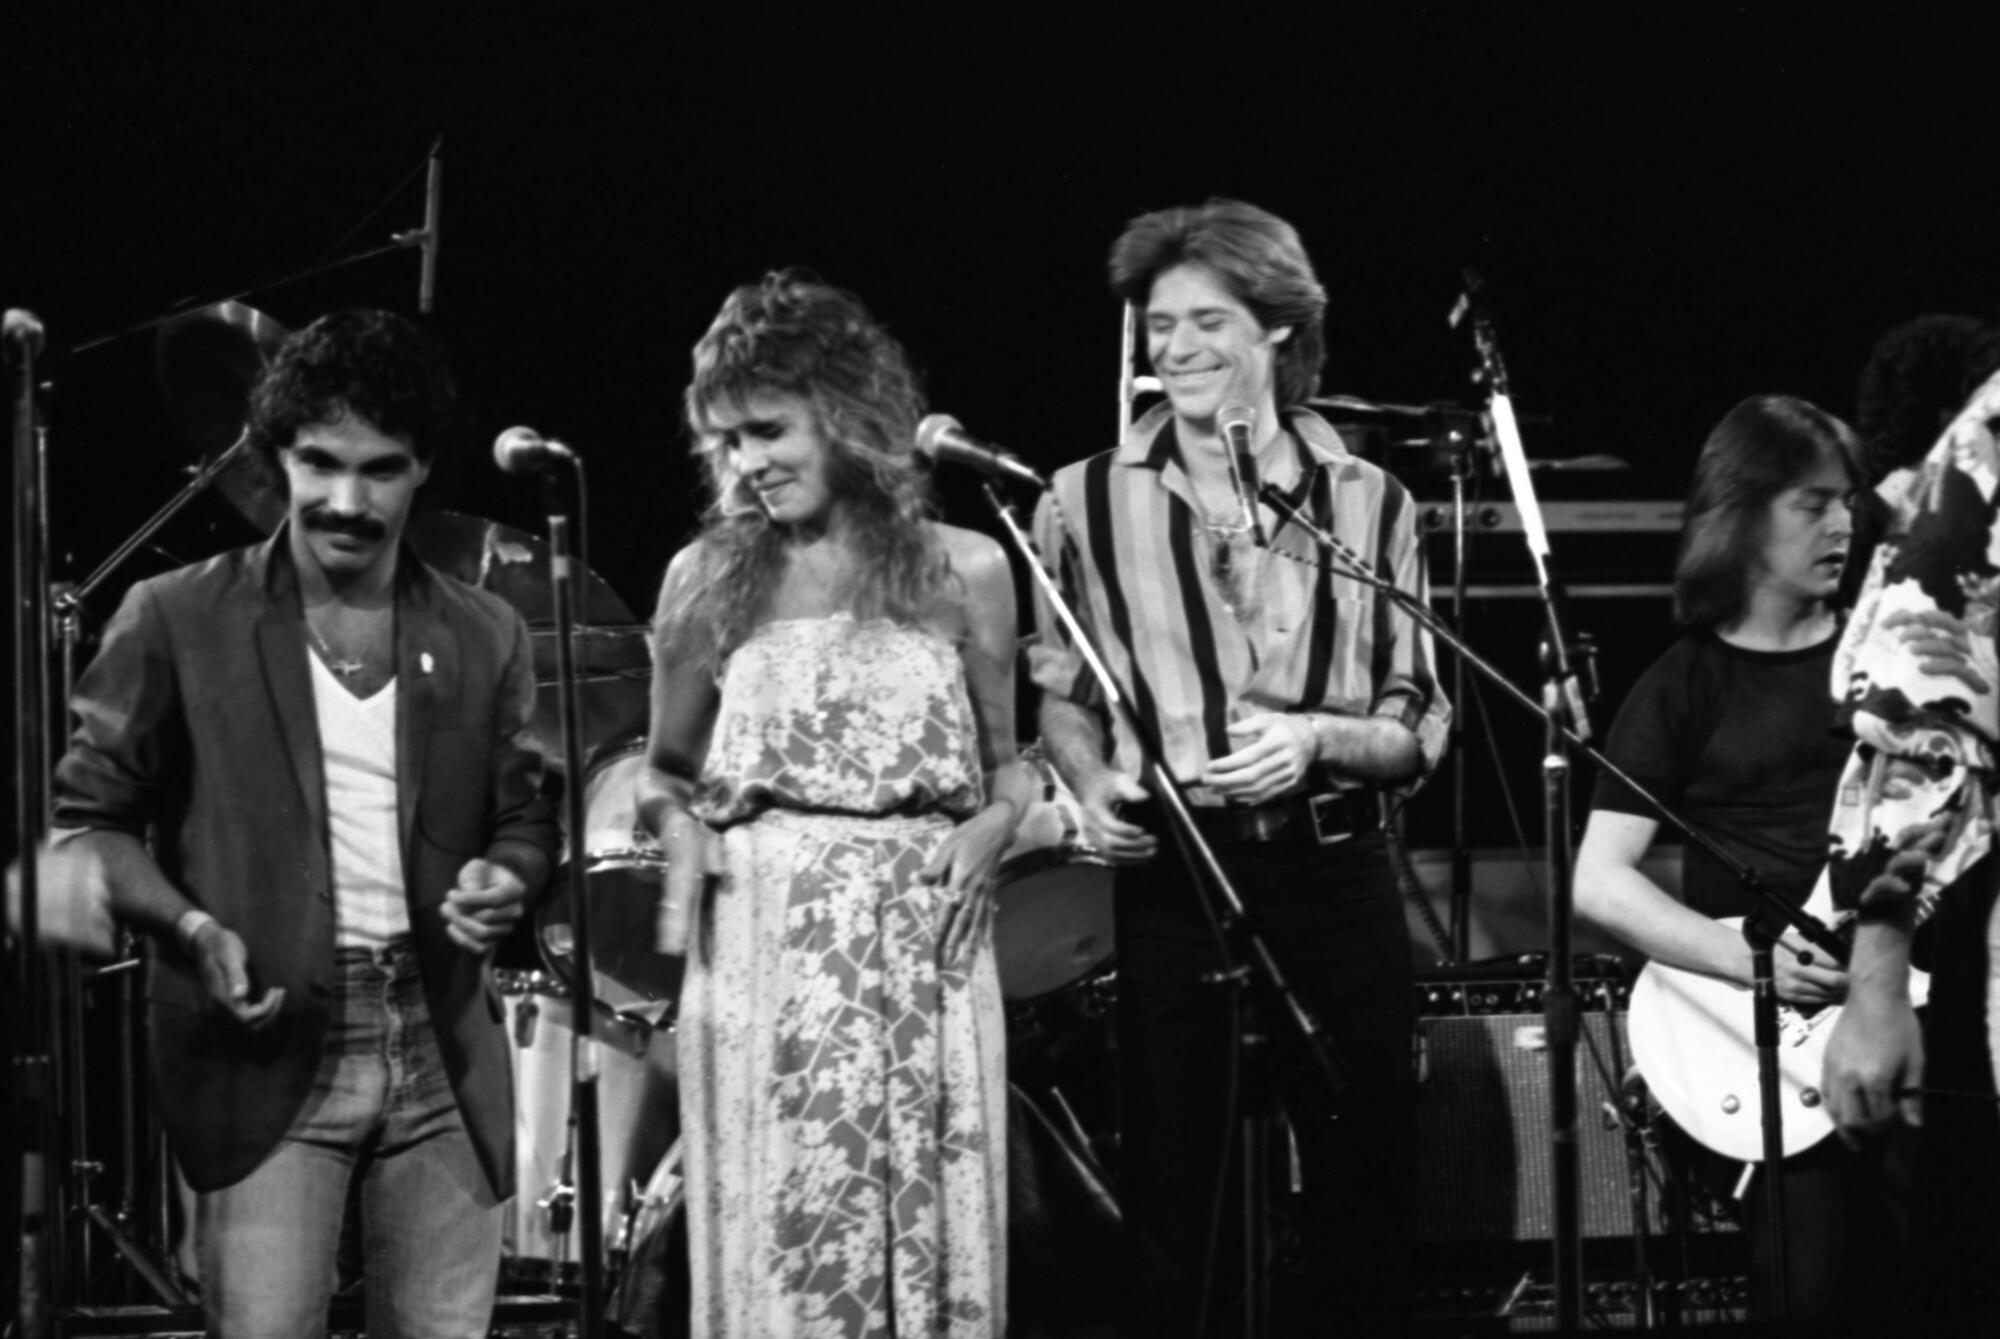 John Oates, from left, Stevie Nicks, Daryl Hall and Rick Derringer perform with Todd Rundgren at the Roxy Theatre in 1978.